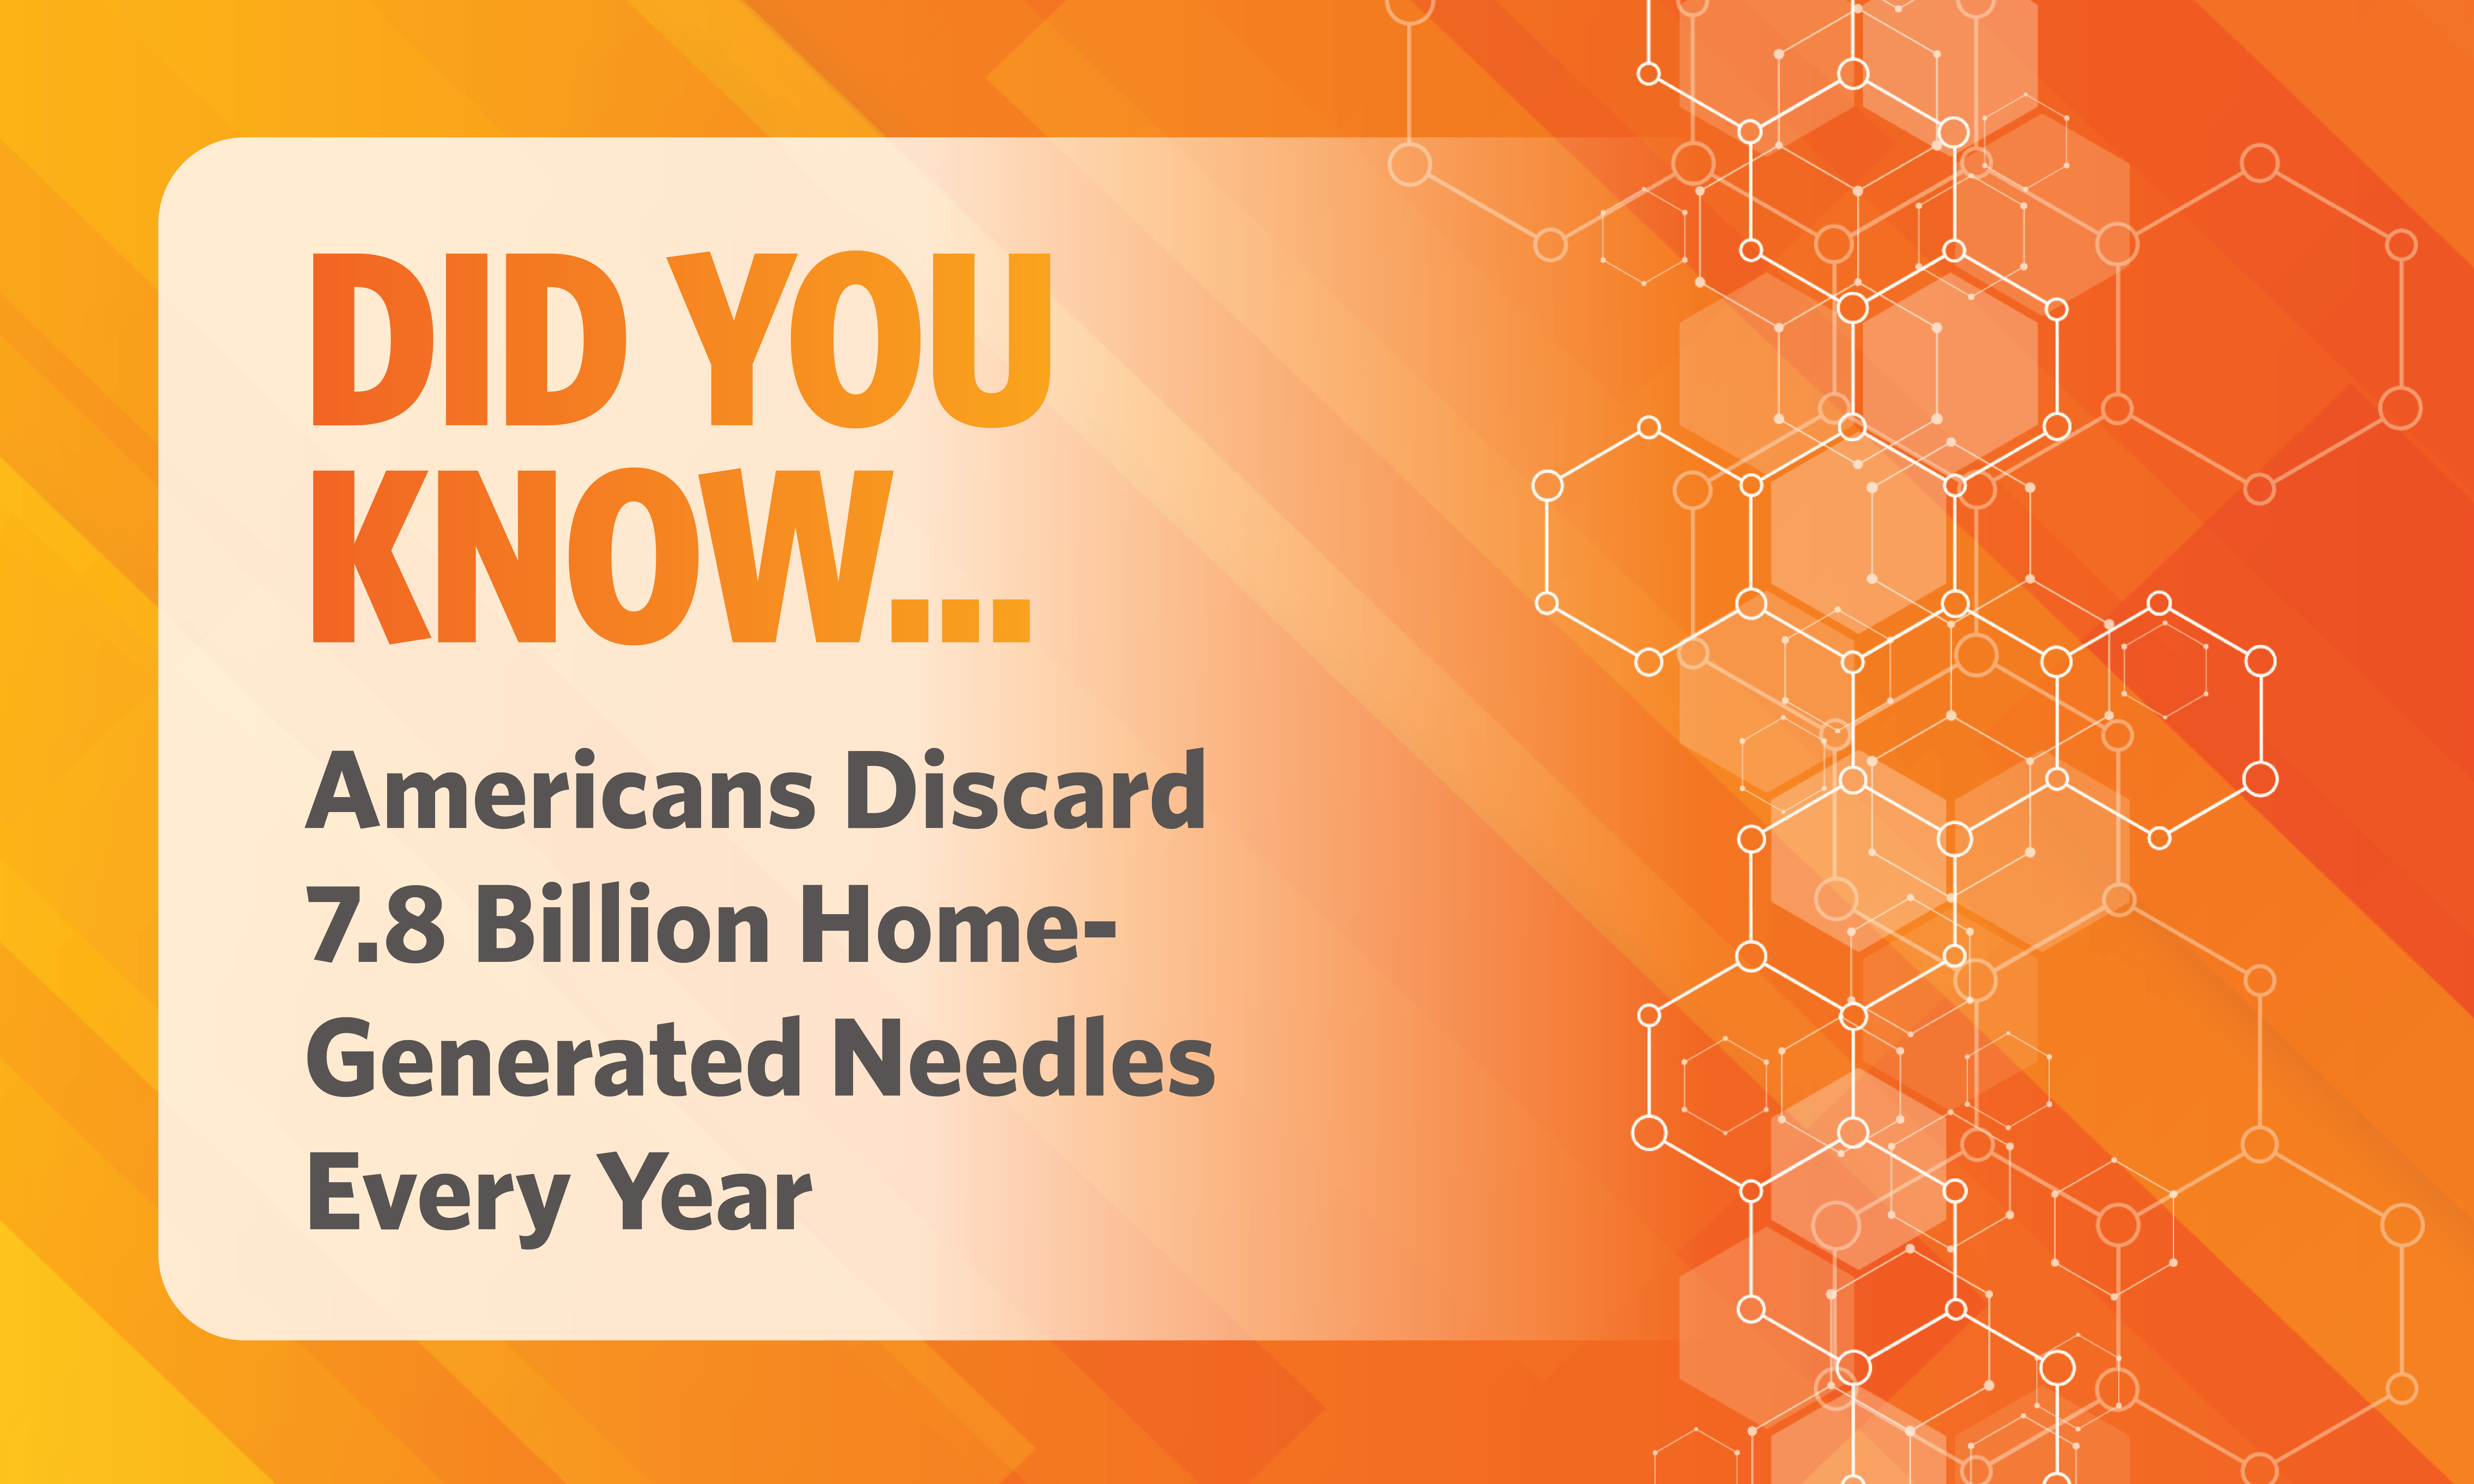 Americans Discard 7.8 Billion Home-Generated Needles Every Year